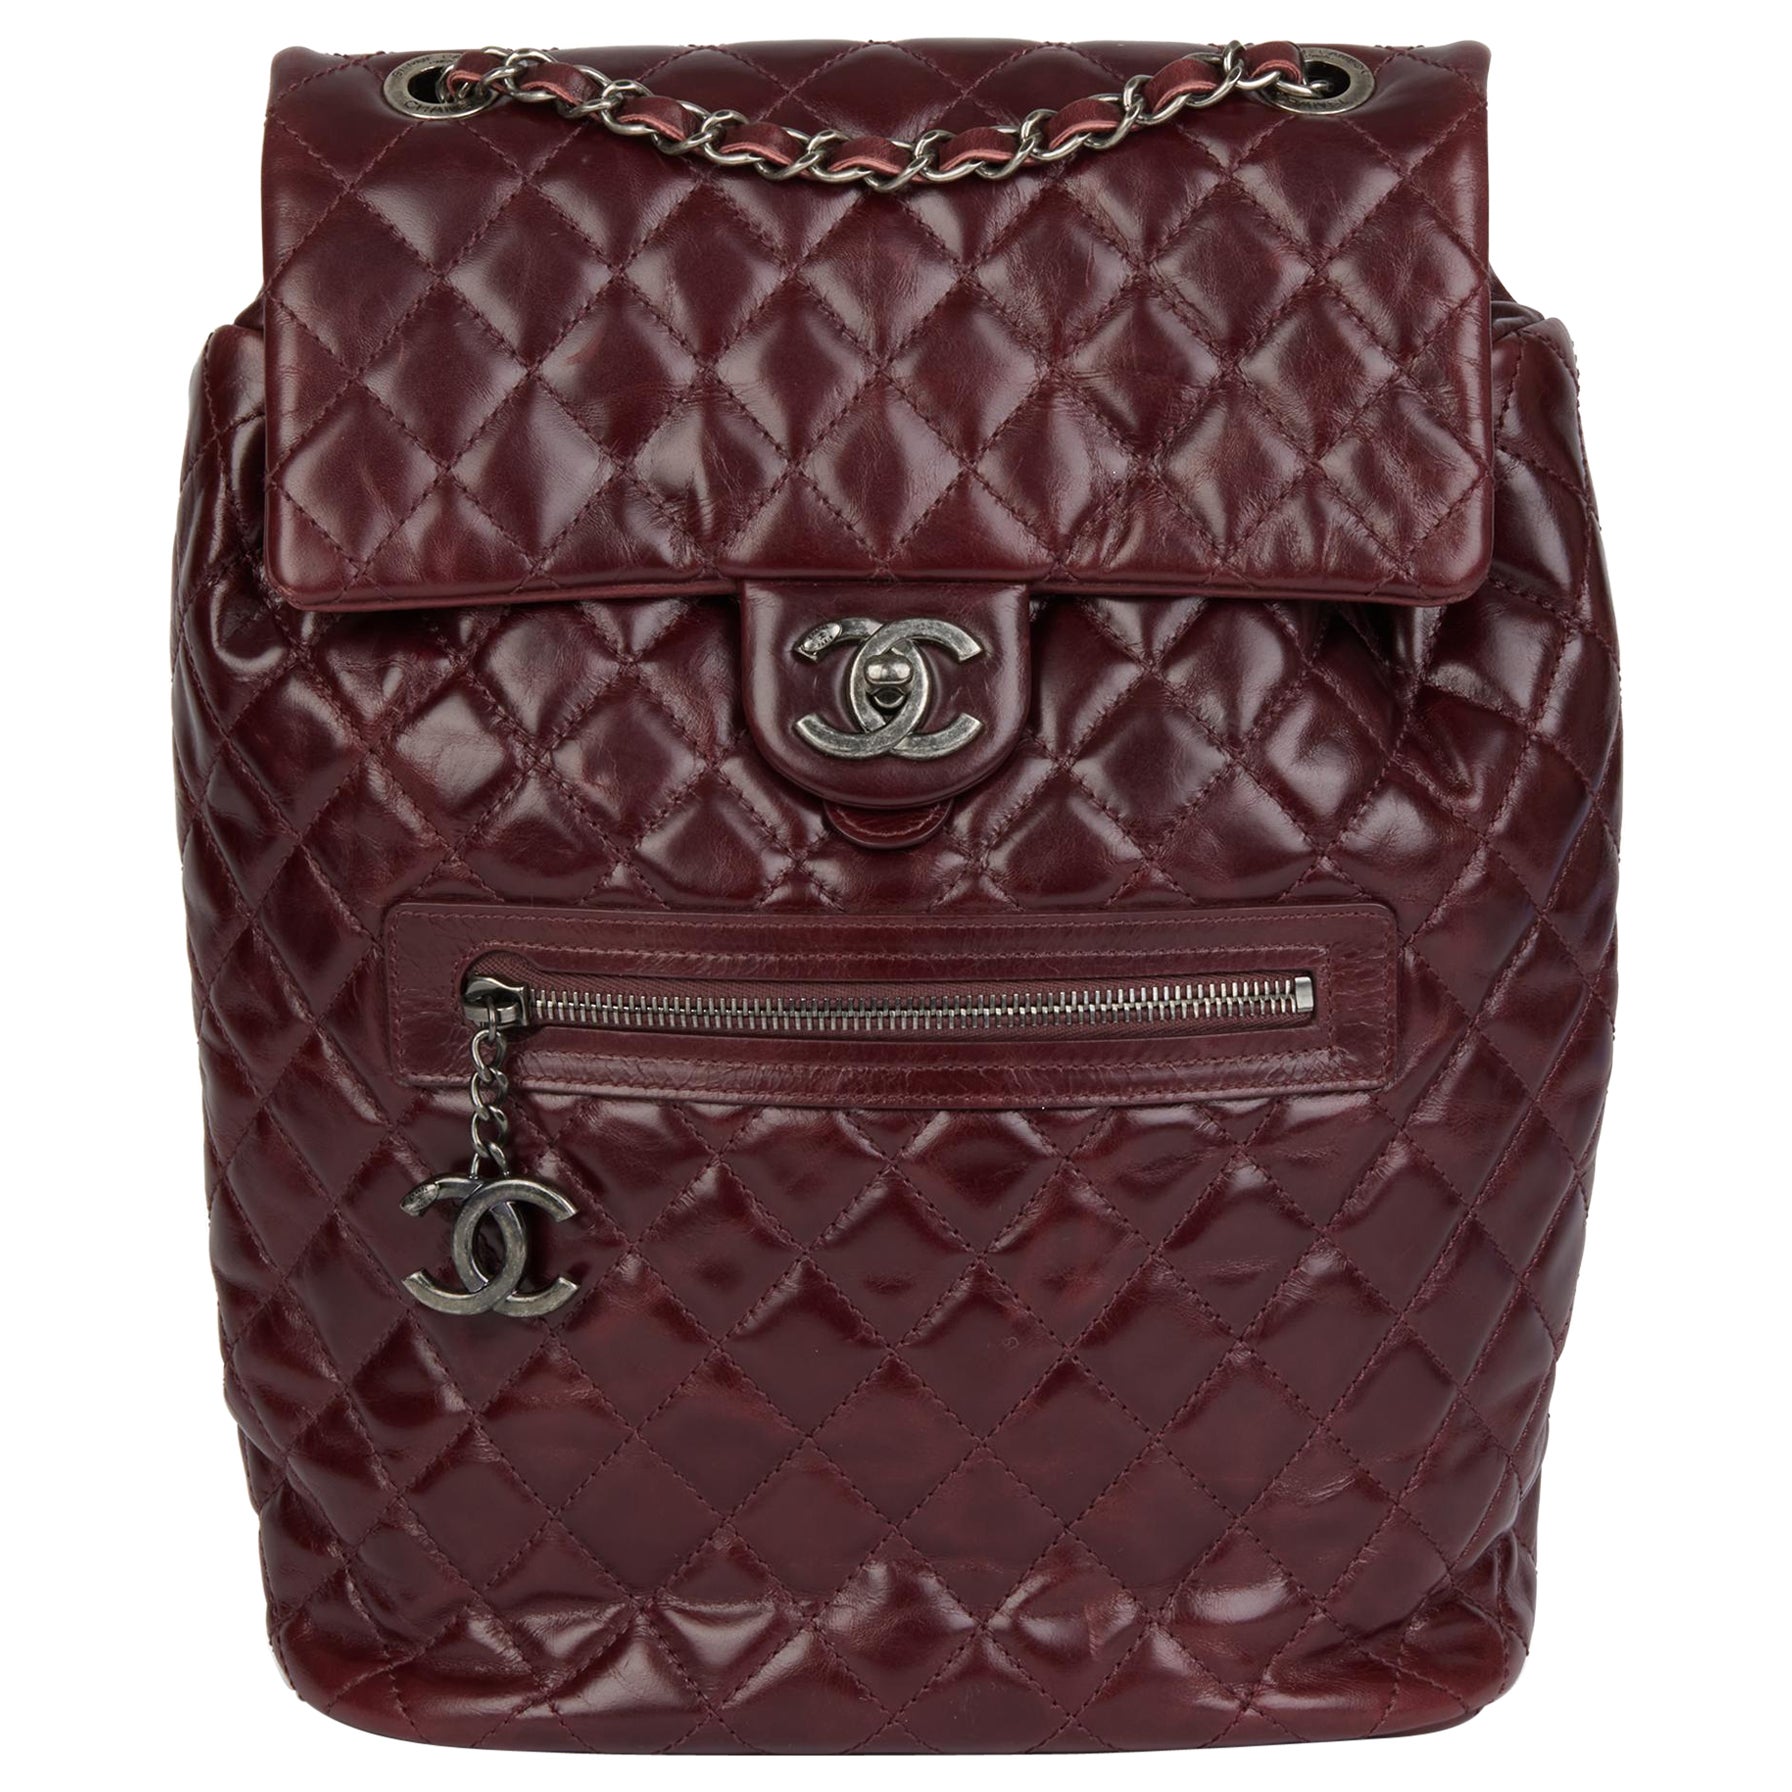 CHANEL Burgundy Calfskin Leather Small Mountain Backpack